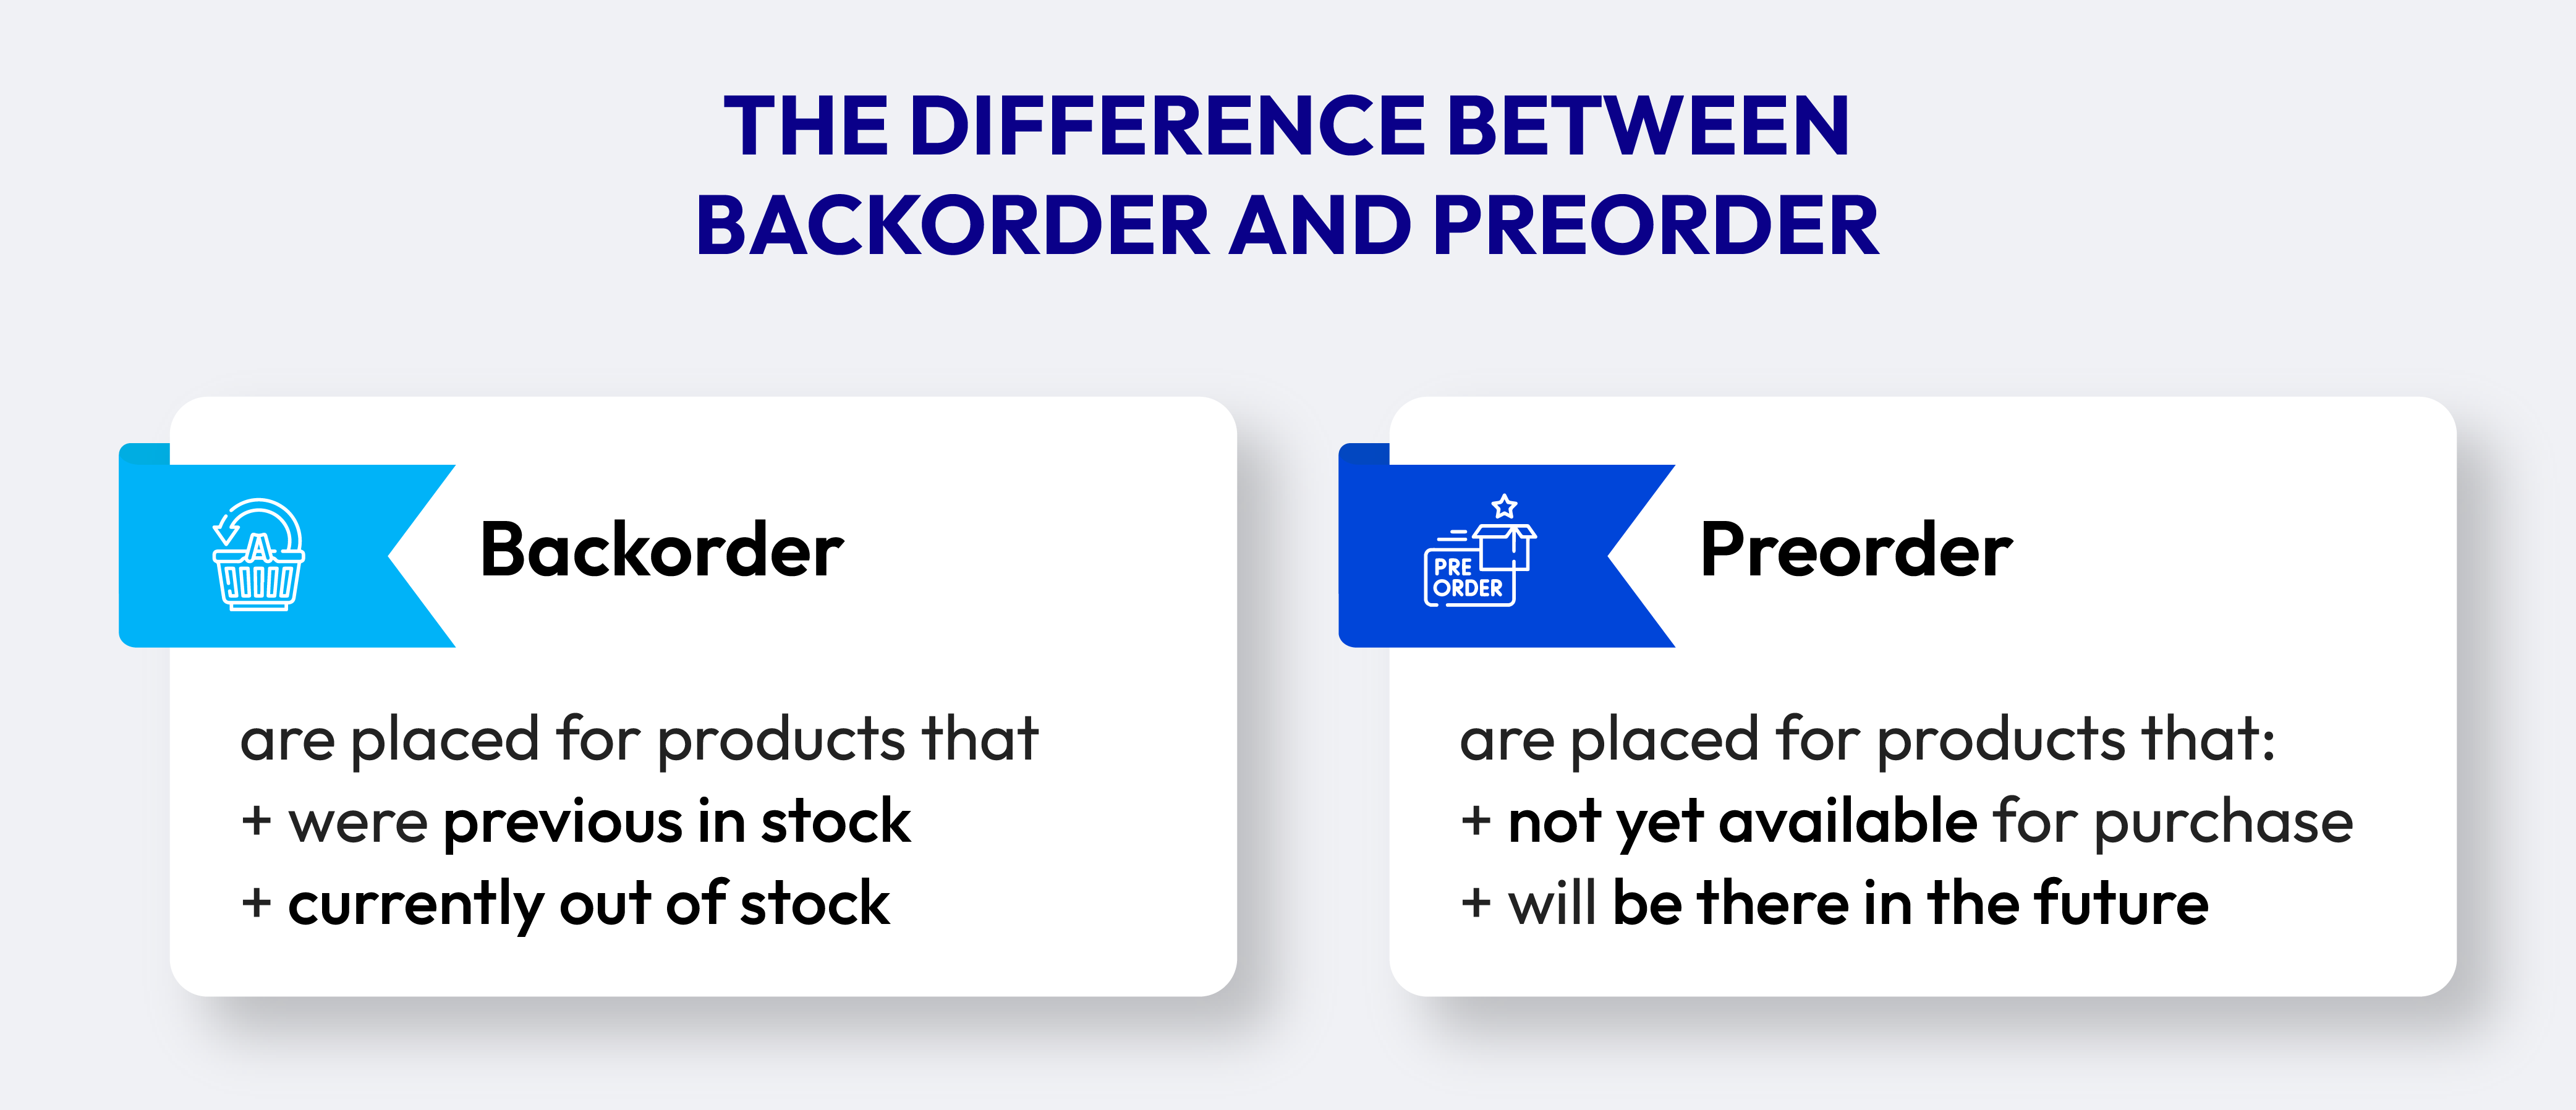 Magento 2 backorder and preorder difference